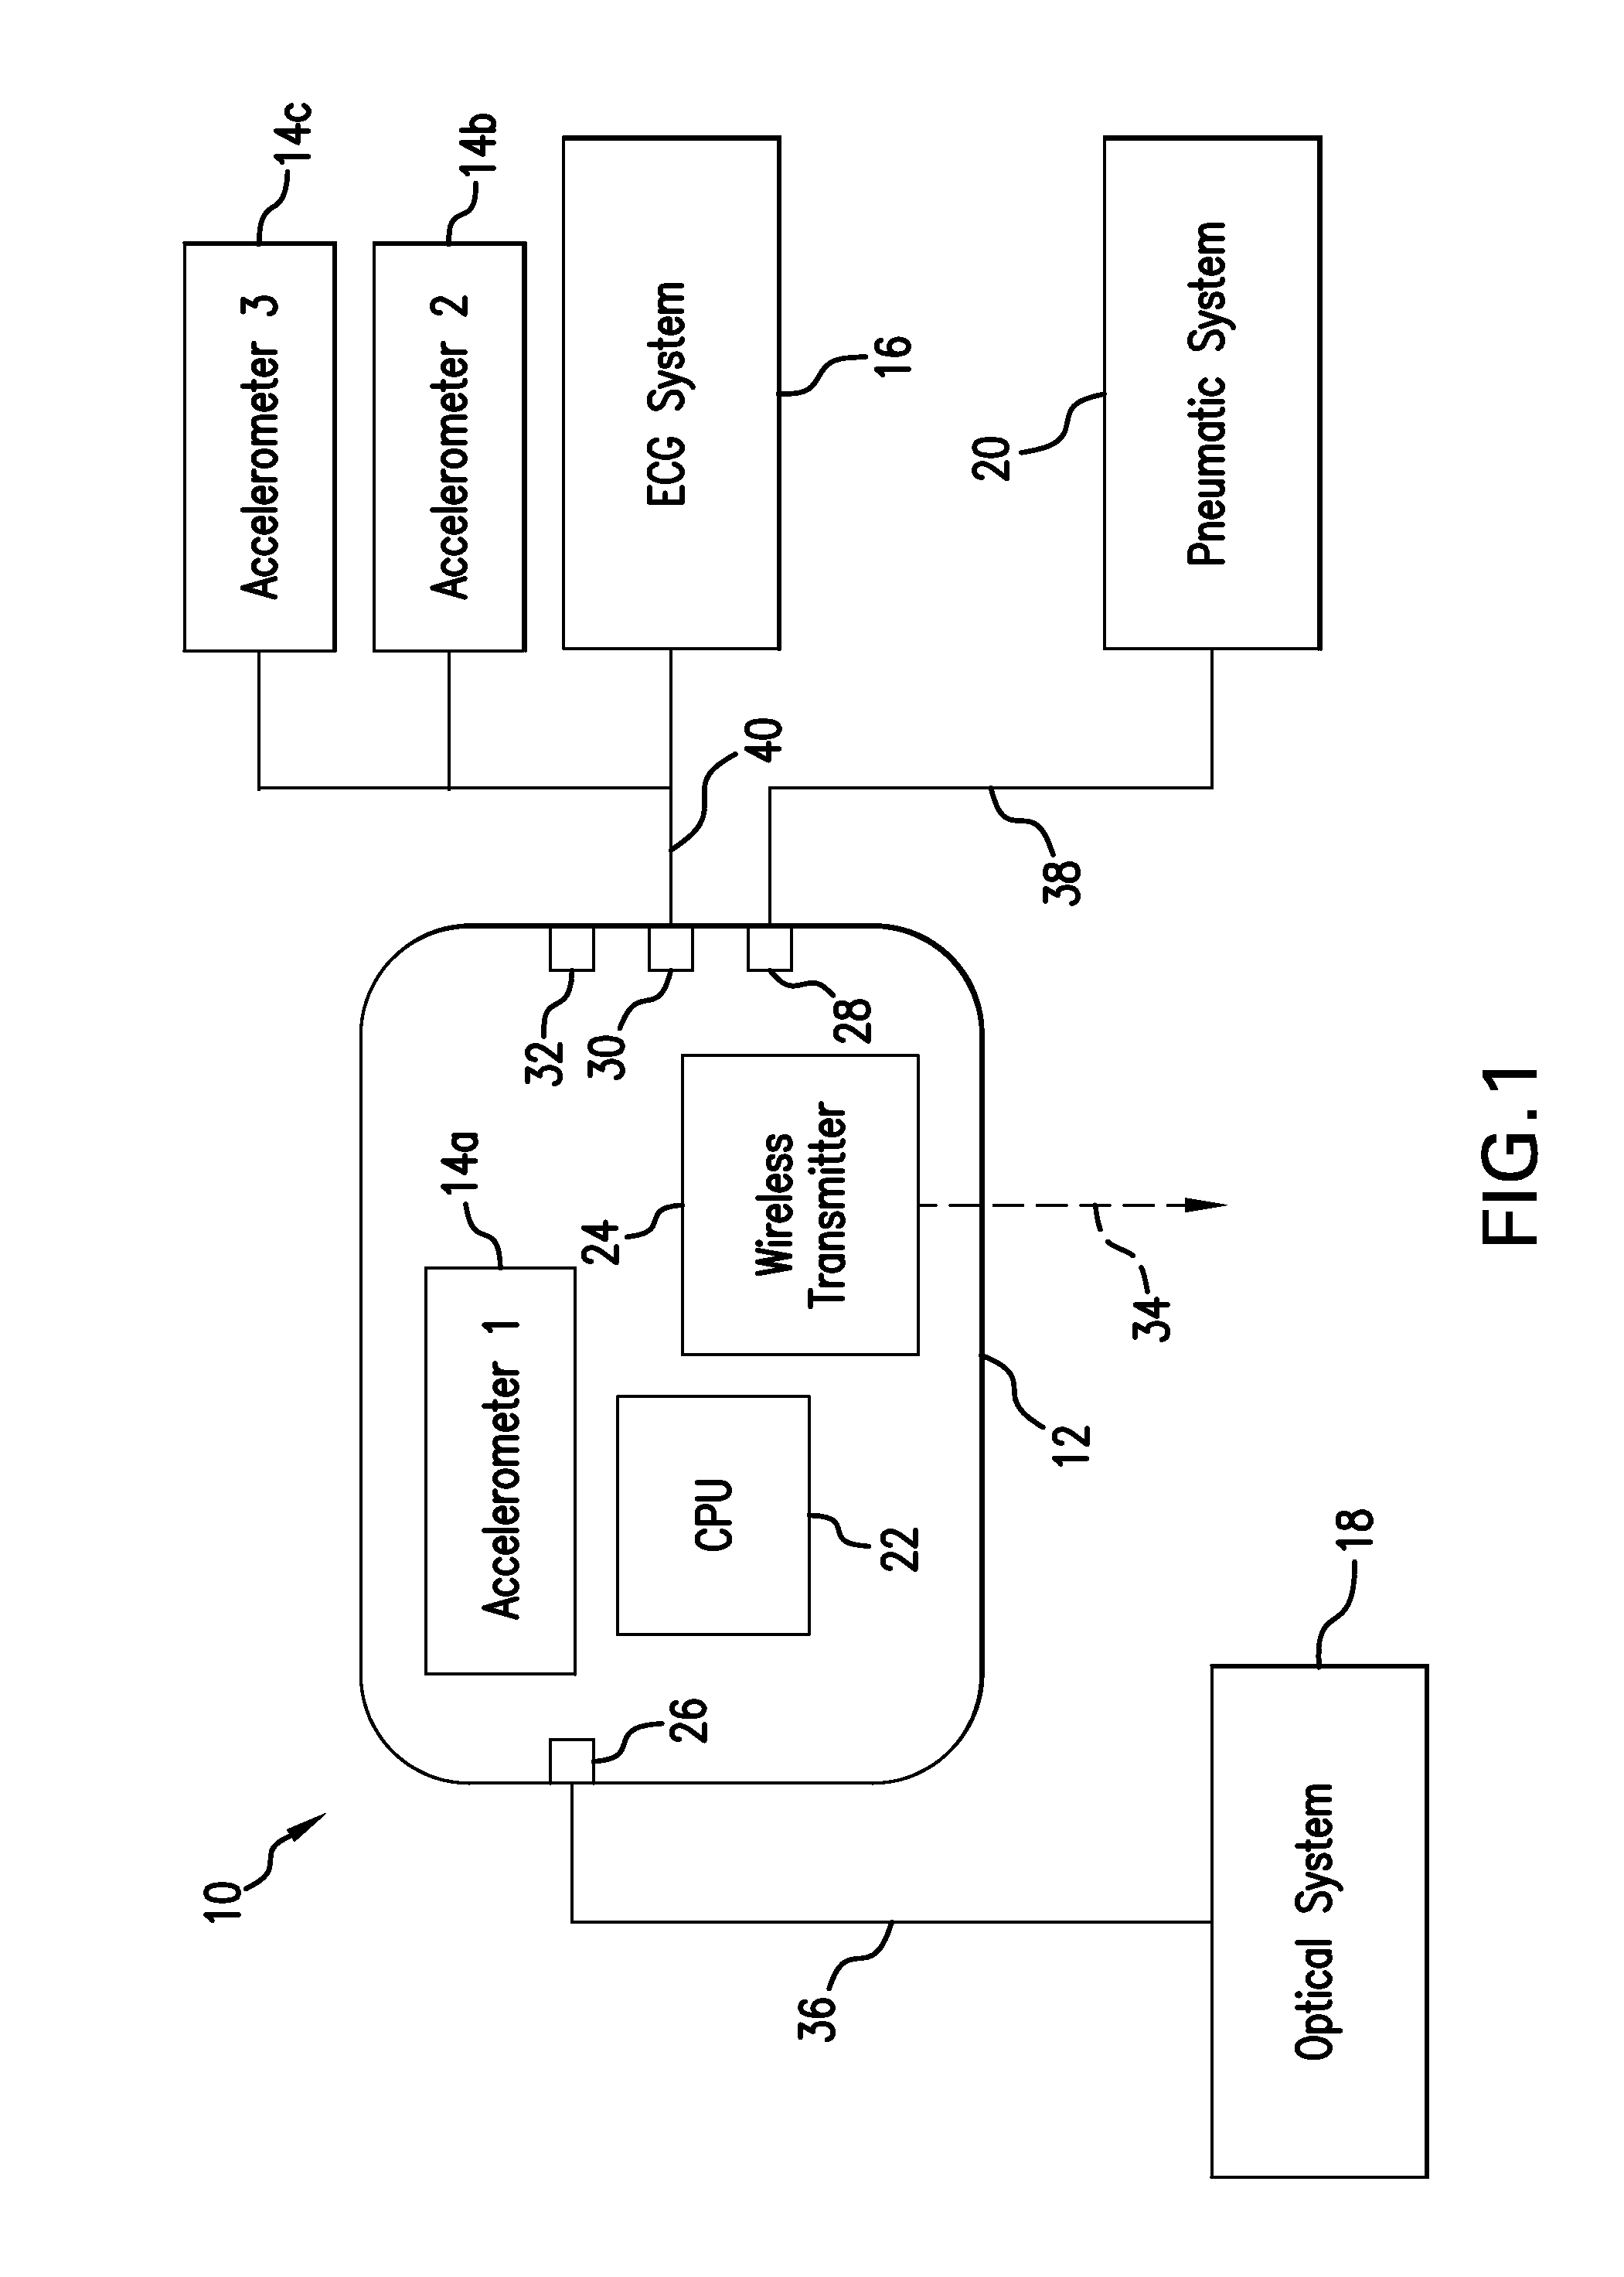 Graphical 'mapping system' for continuously monitoring a patient's vital signs, motion, and location